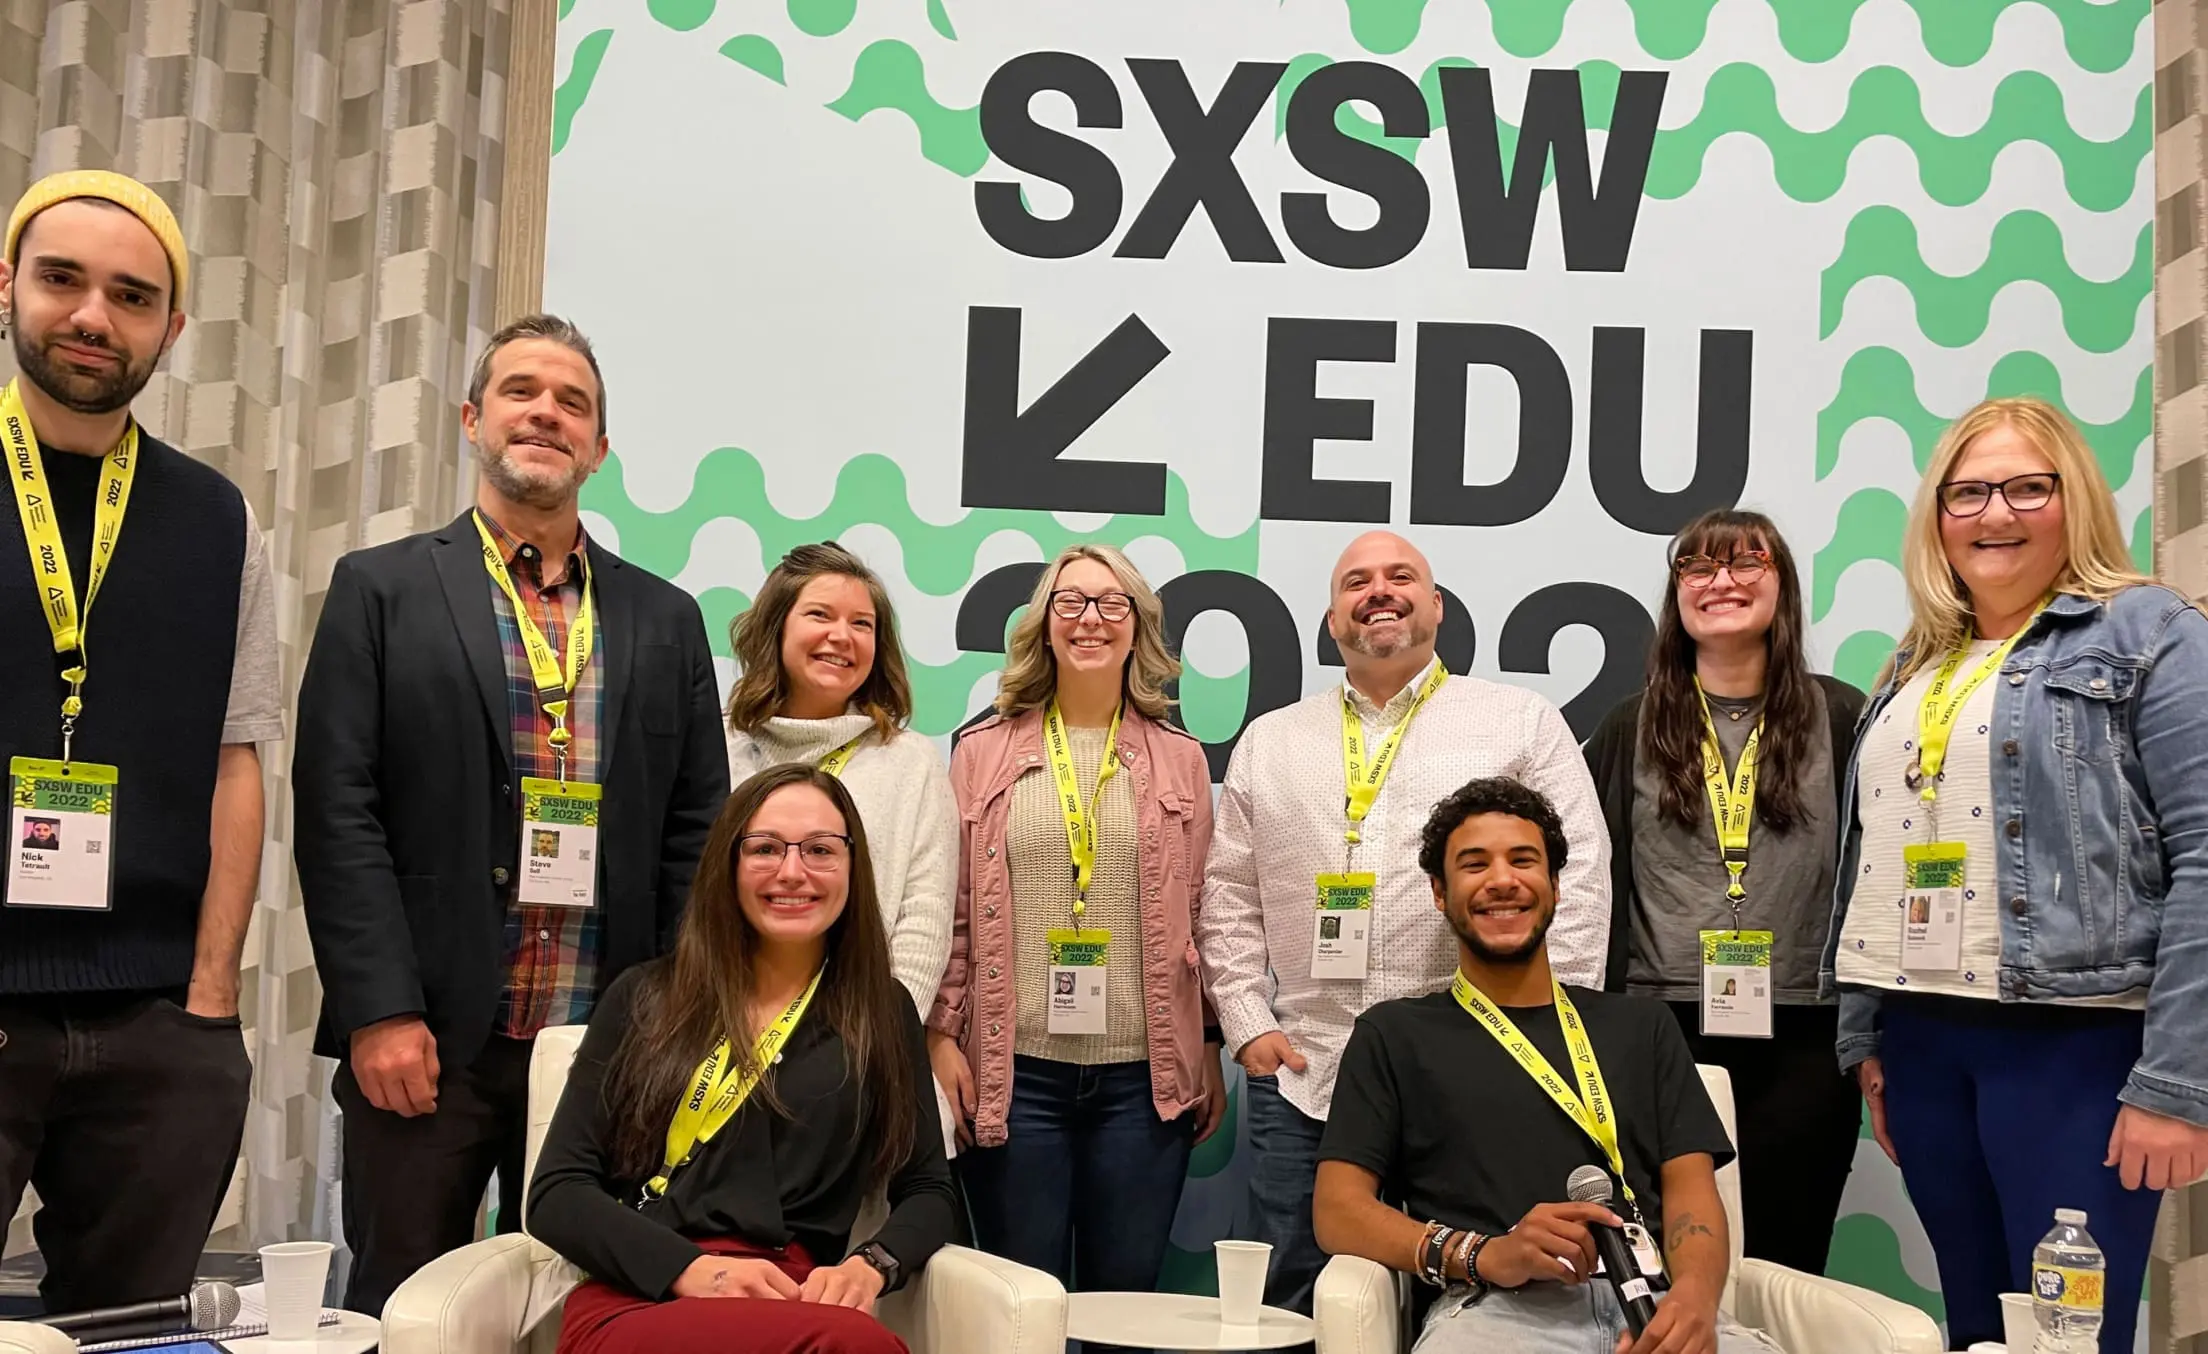 A group of nine people is posing together at the SXSW EDU 2022 event. They are standing and sitting in front of a large, decorative backdrop that reads "SXSW EDU 2022" with a green and white wavy pattern. Each person is wearing a lanyard with an event badge.